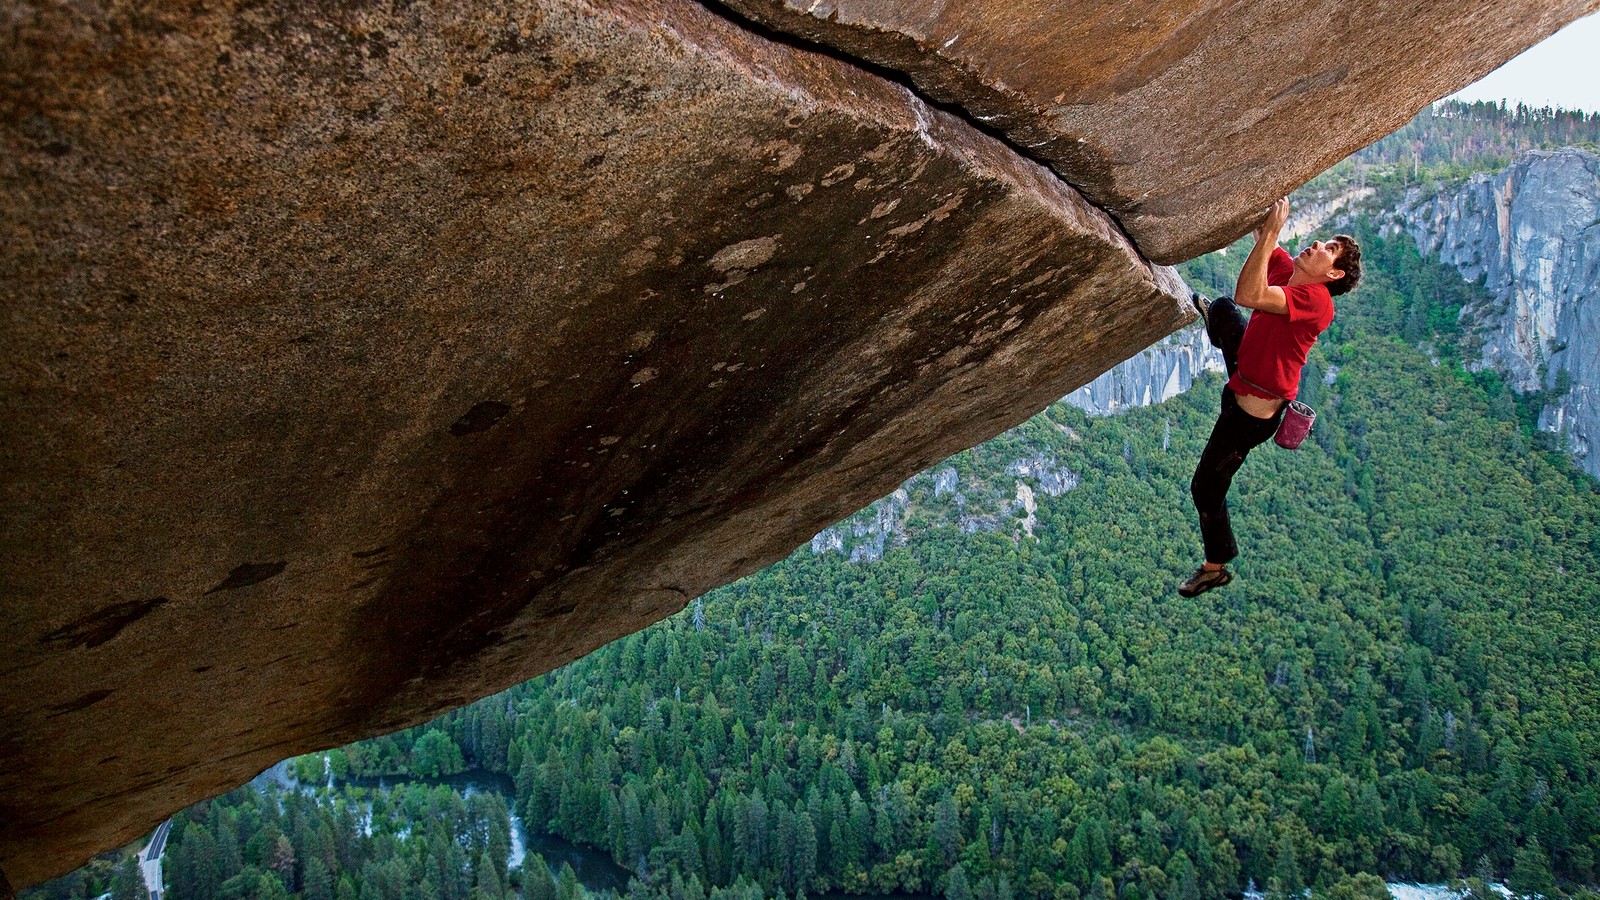 Alex Honnold Describes Why He Free Solo Climbs in His New Book 'Alone on  the Wall' - The Atlantic